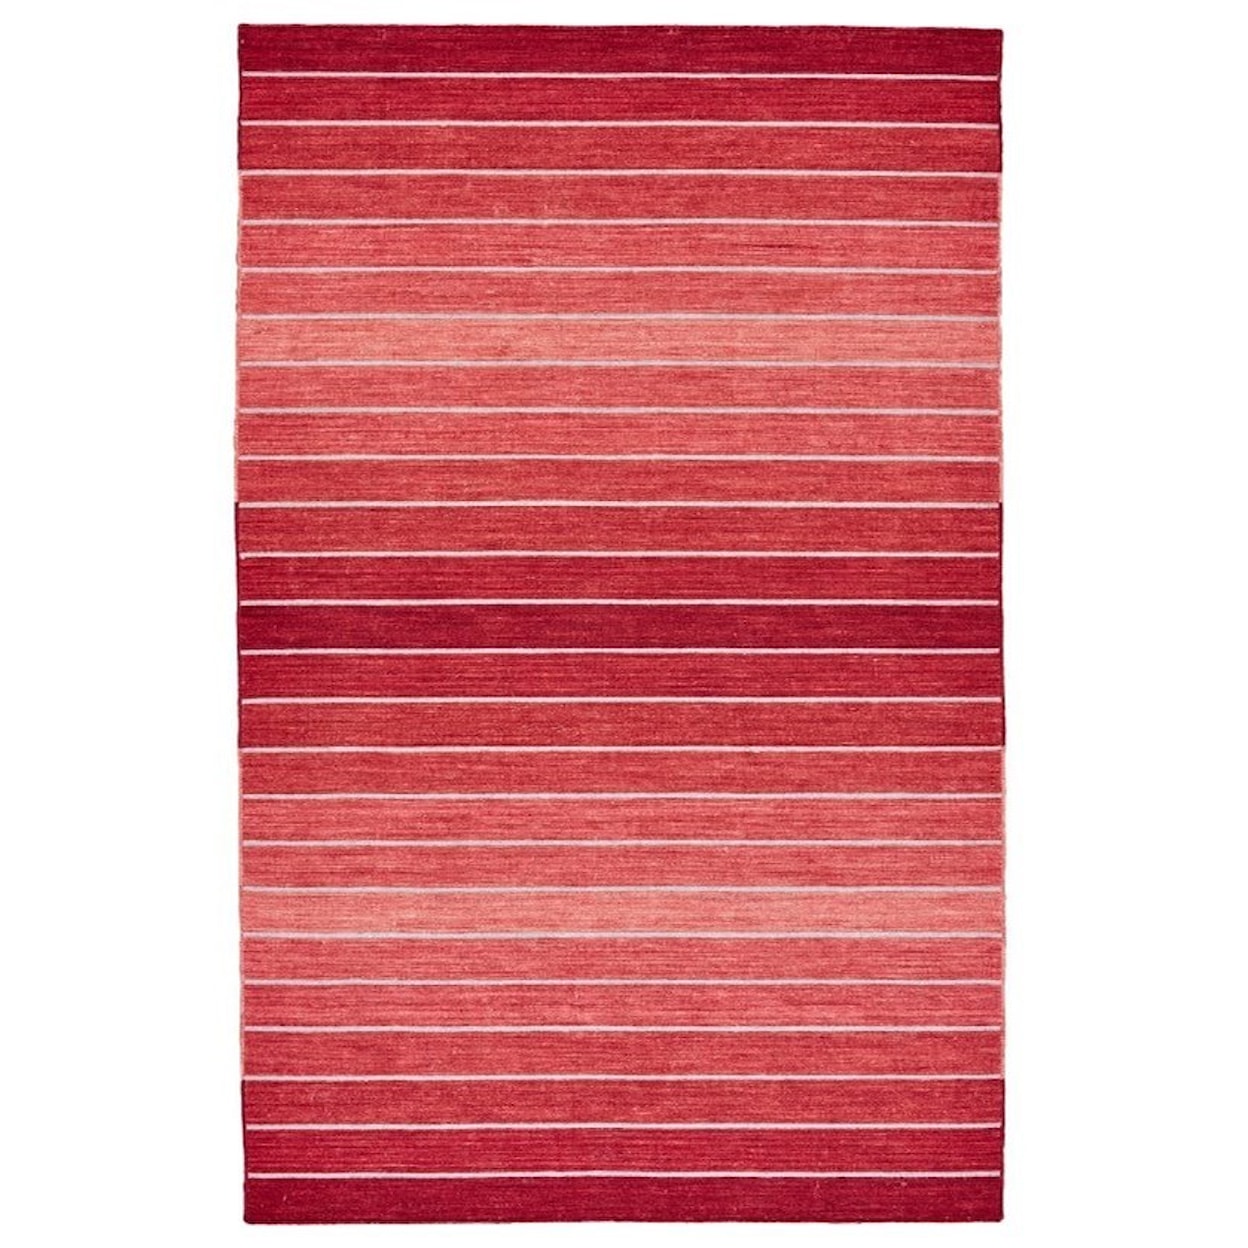 Feizy Rugs Santino Red 8' X 11' Area Rug